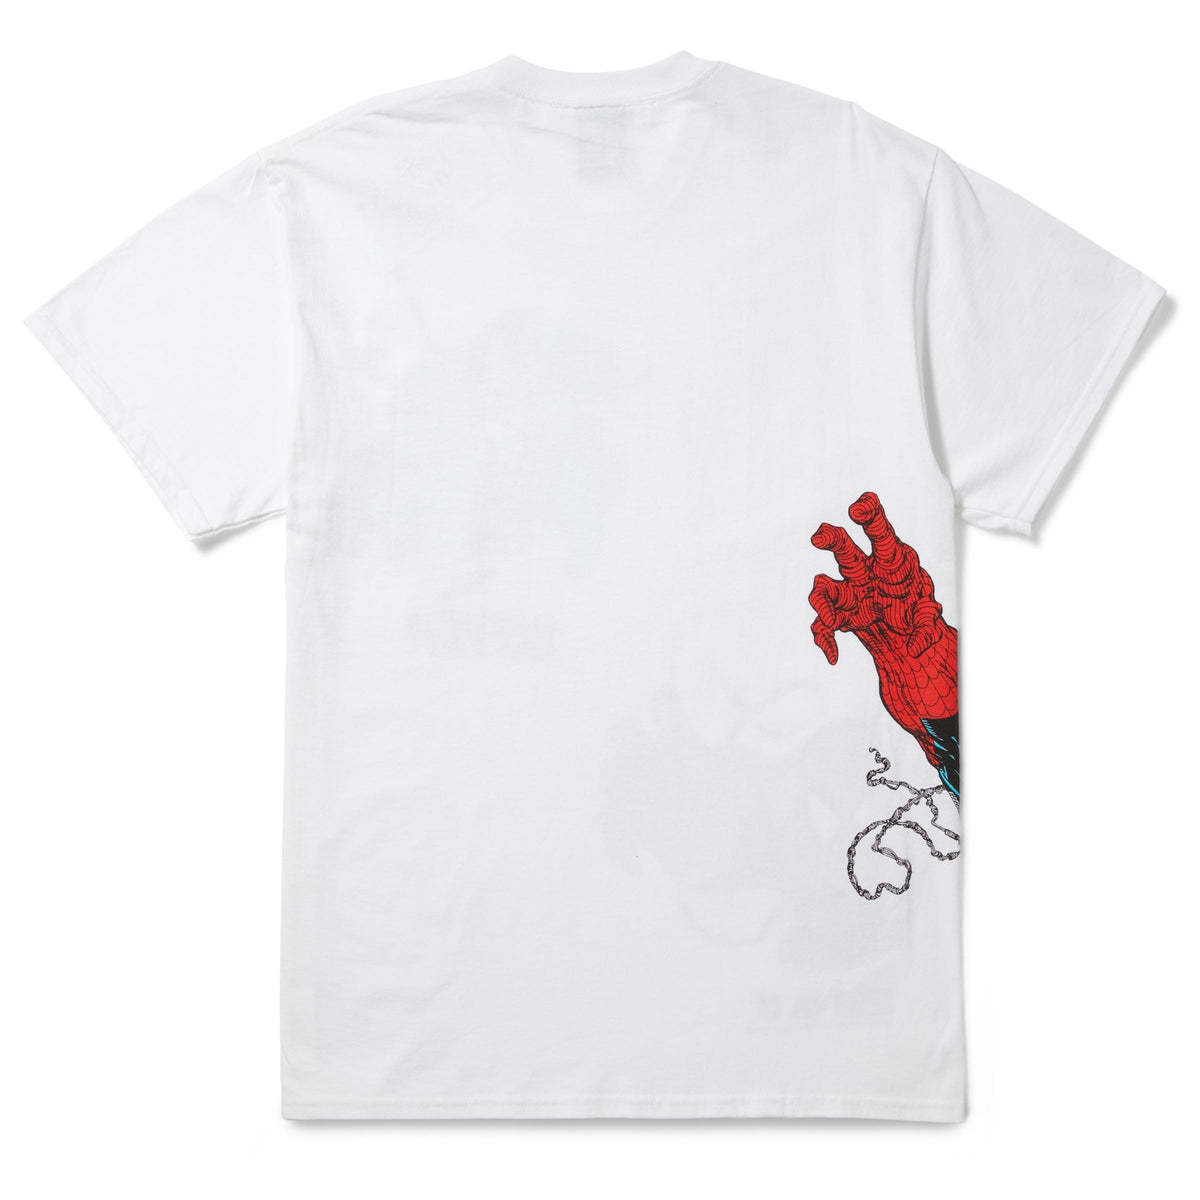 HUF FACE OFF TEE - (SPIDERMAN) WHITE